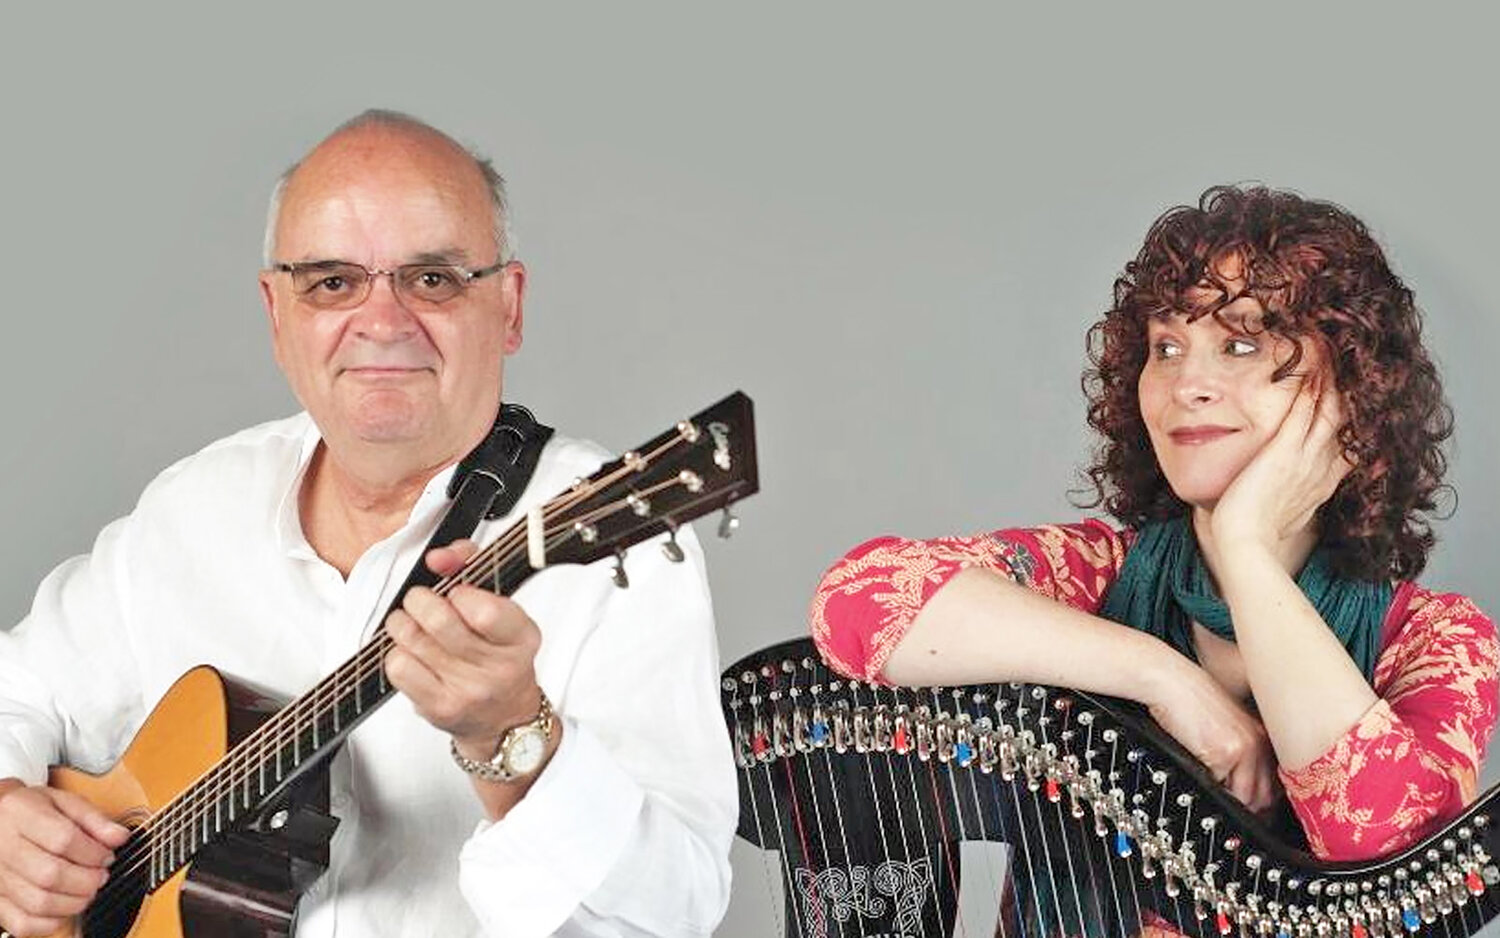 Guitarist Chris Newman and Harpist Maire Ni Chathasaigh perform an Irish music concert at 7 p.m. March 24 at the Irish Cultural Center of the Mohawk Valley-Museum in Utica.